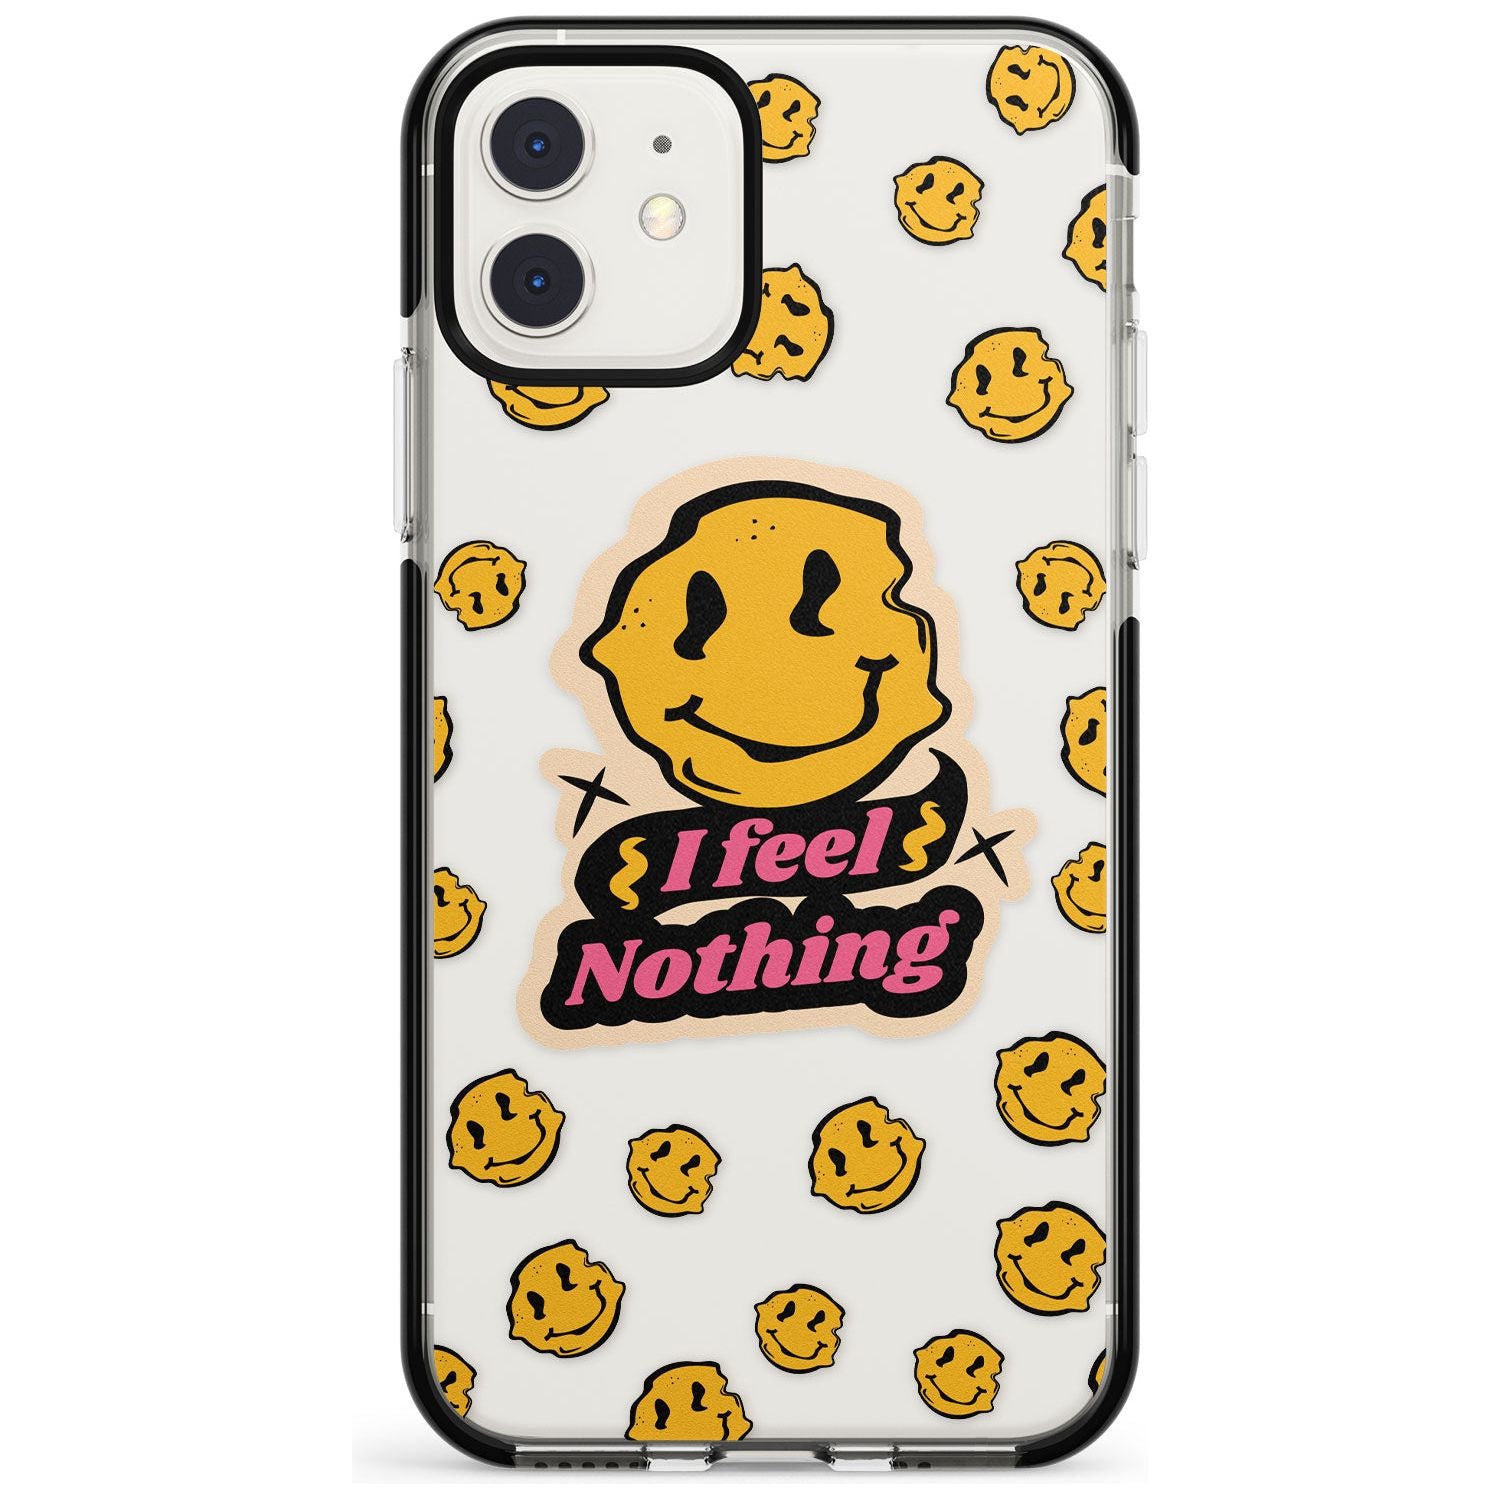 I feel nothing (Clear) Black Impact Phone Case for iPhone 11